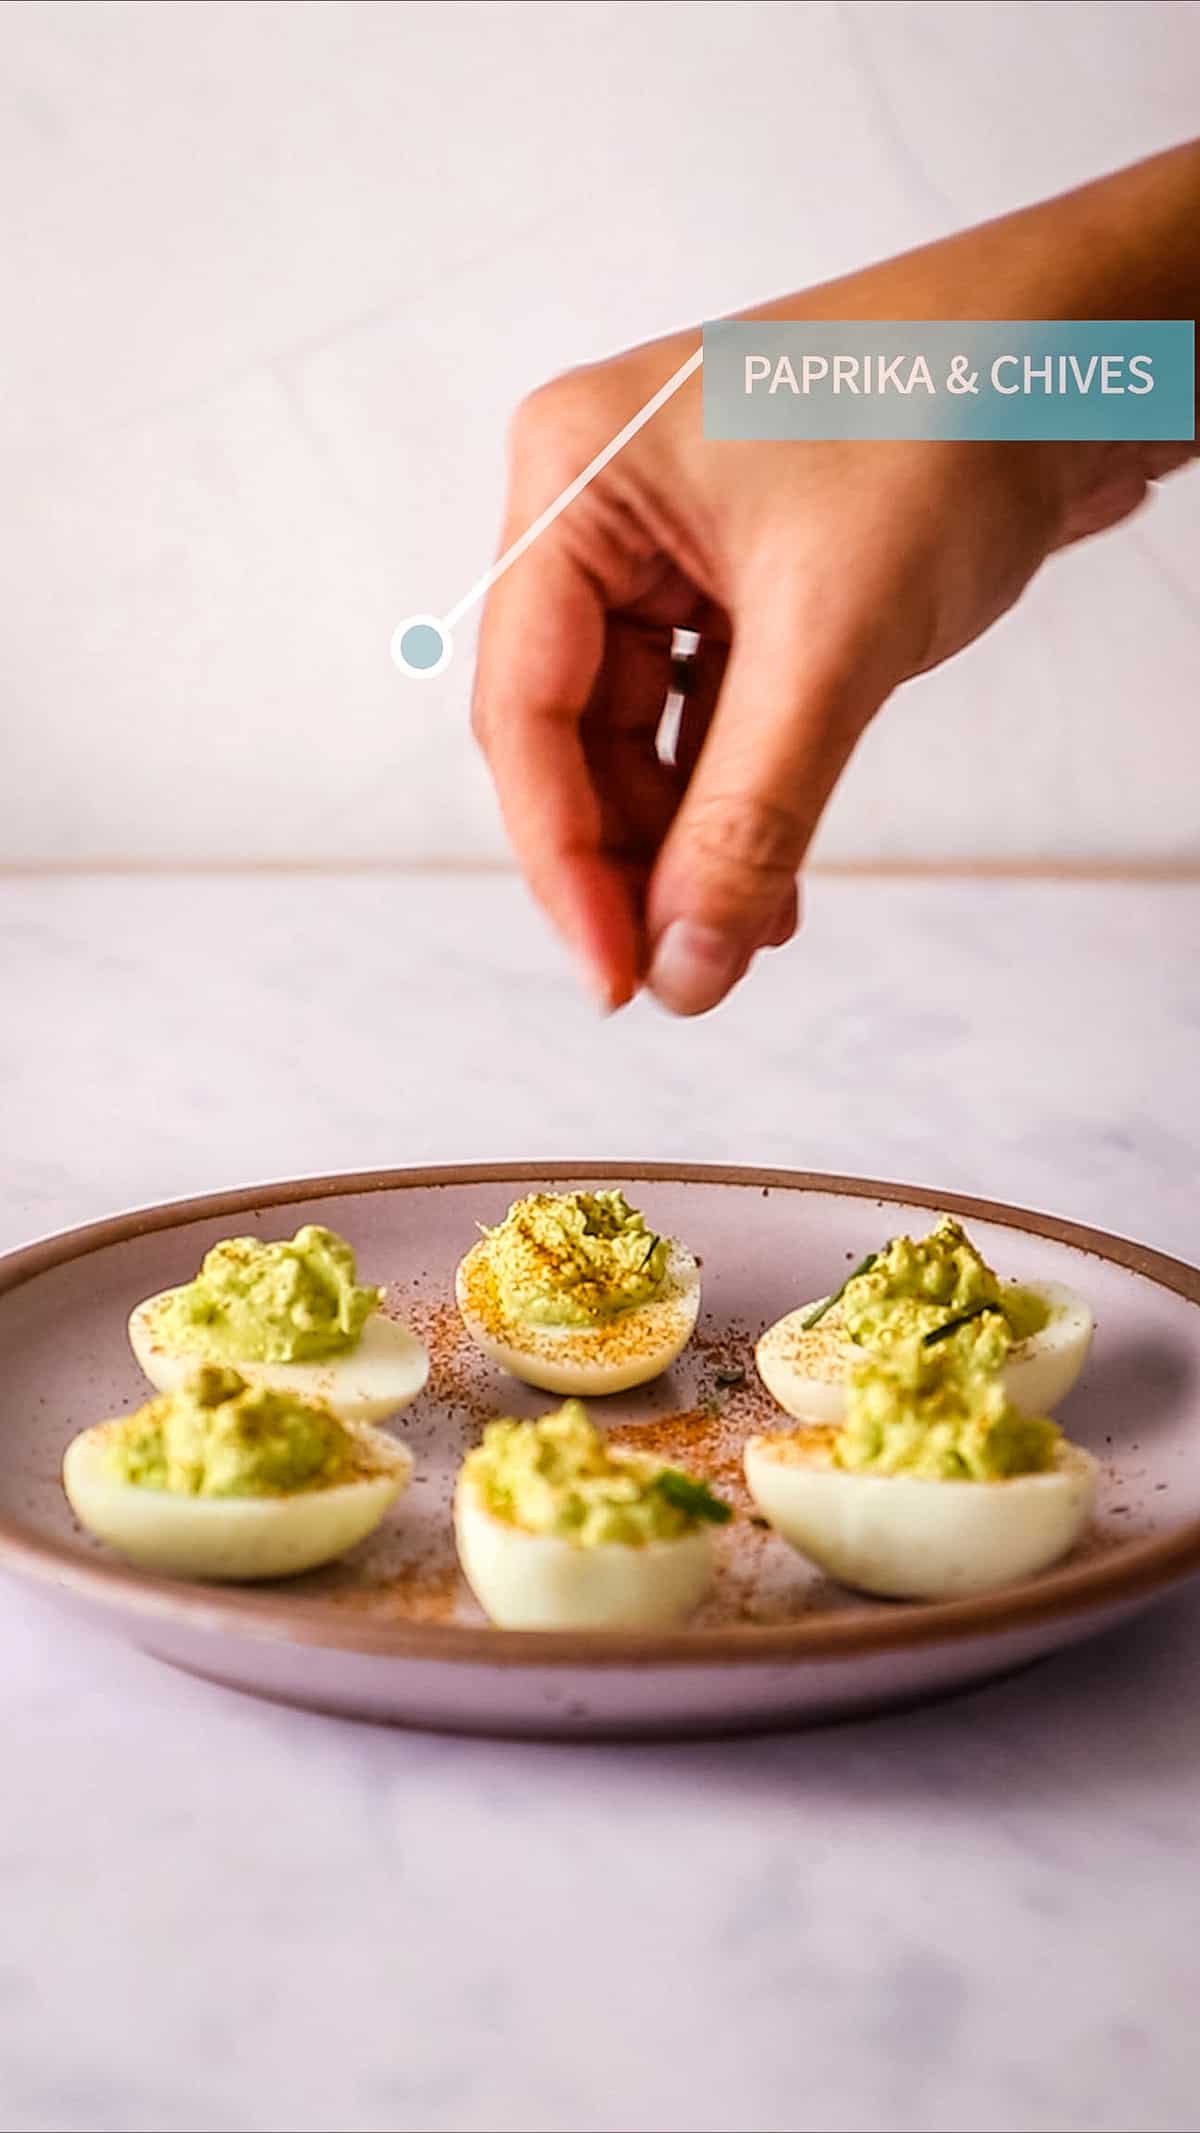 Hand sprinkling paprika over finished deviled eggs in lilac plate.